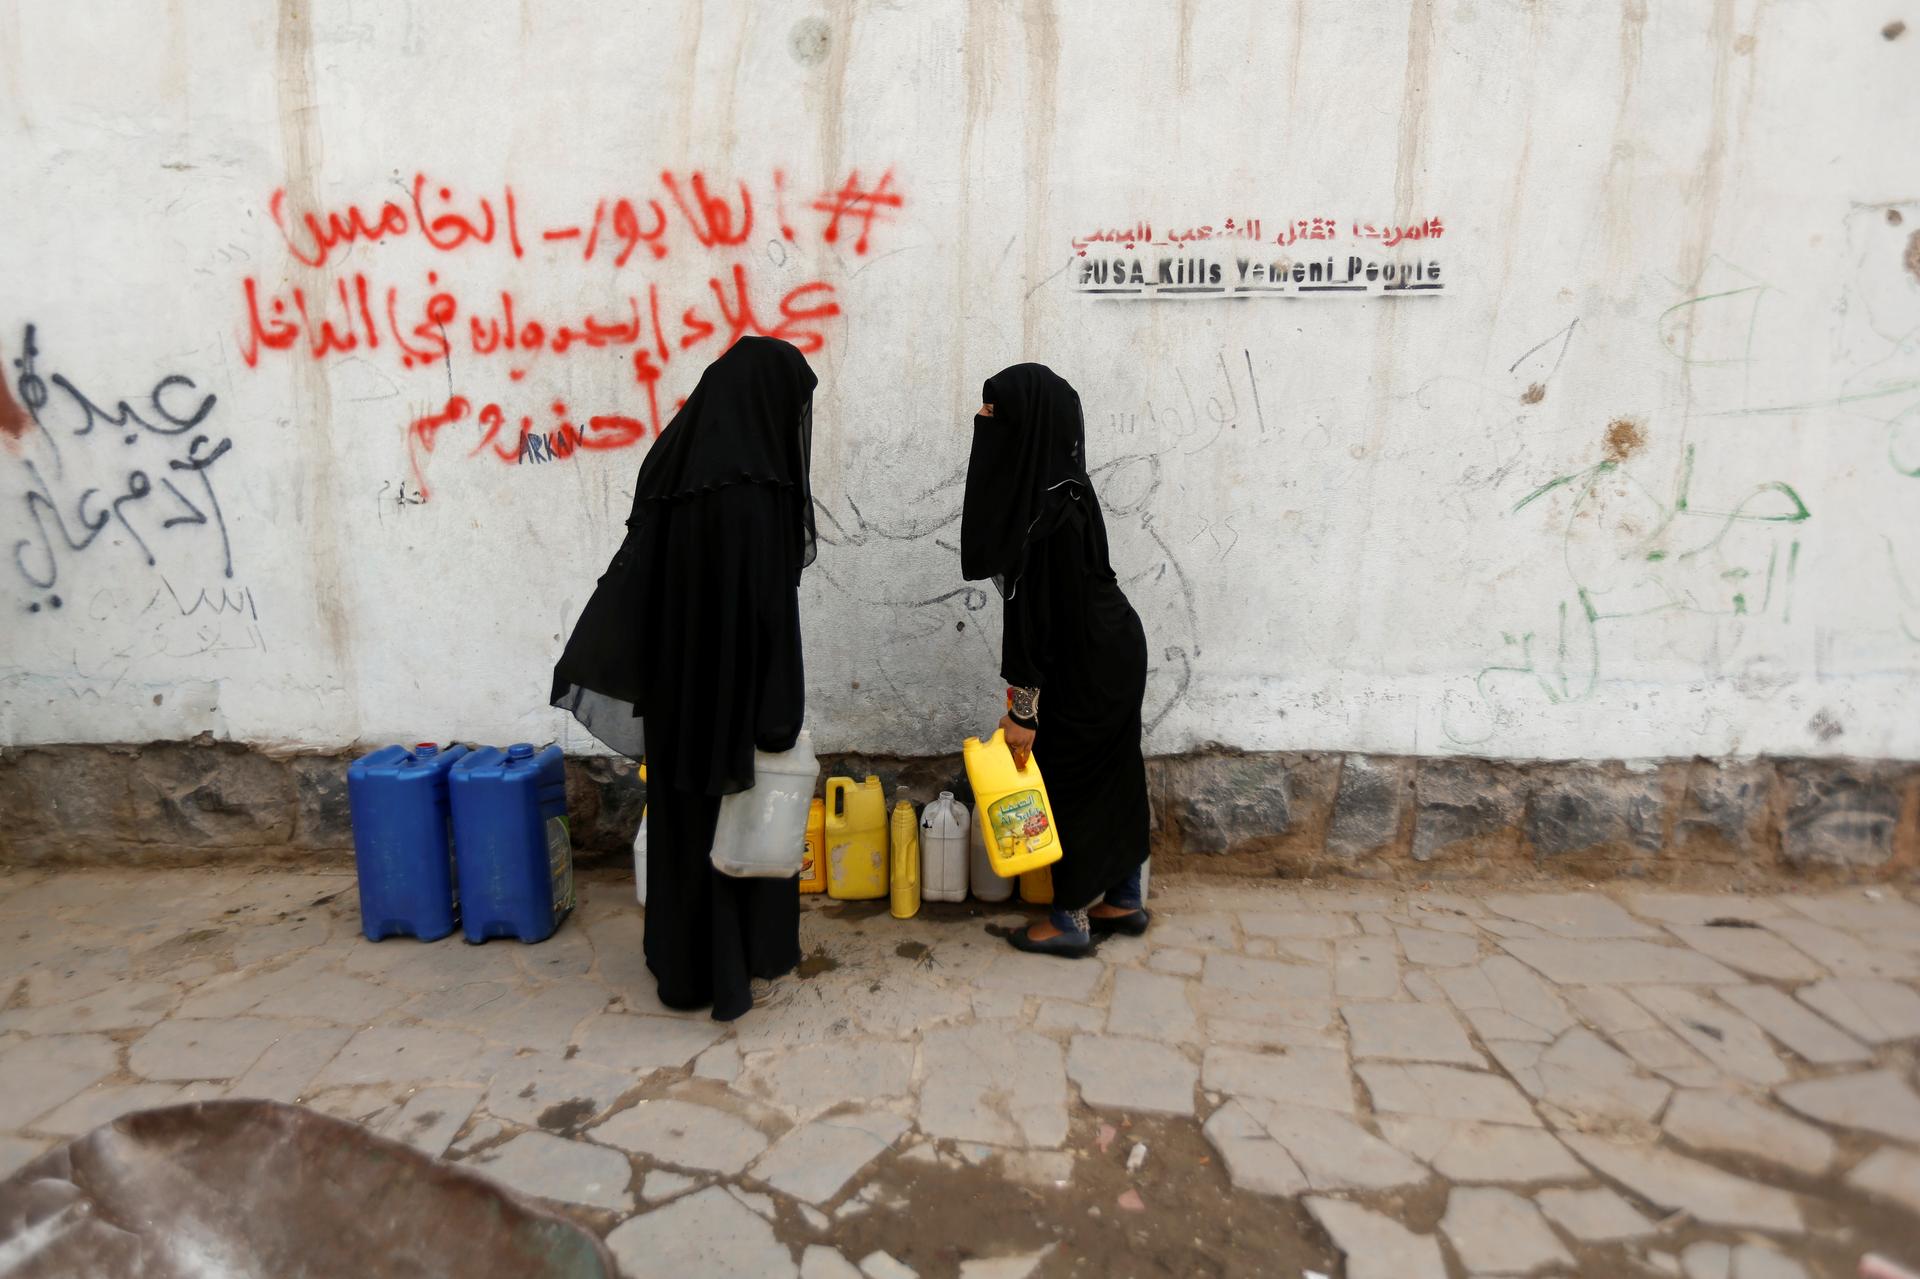 Women fully covered in black carry jerrycans after they filled them up with drinking water from a charity tap, amid a cholera outbreak, in Sanaa. Graffiti on wall behind them reads "USA kills Yemeni people." 